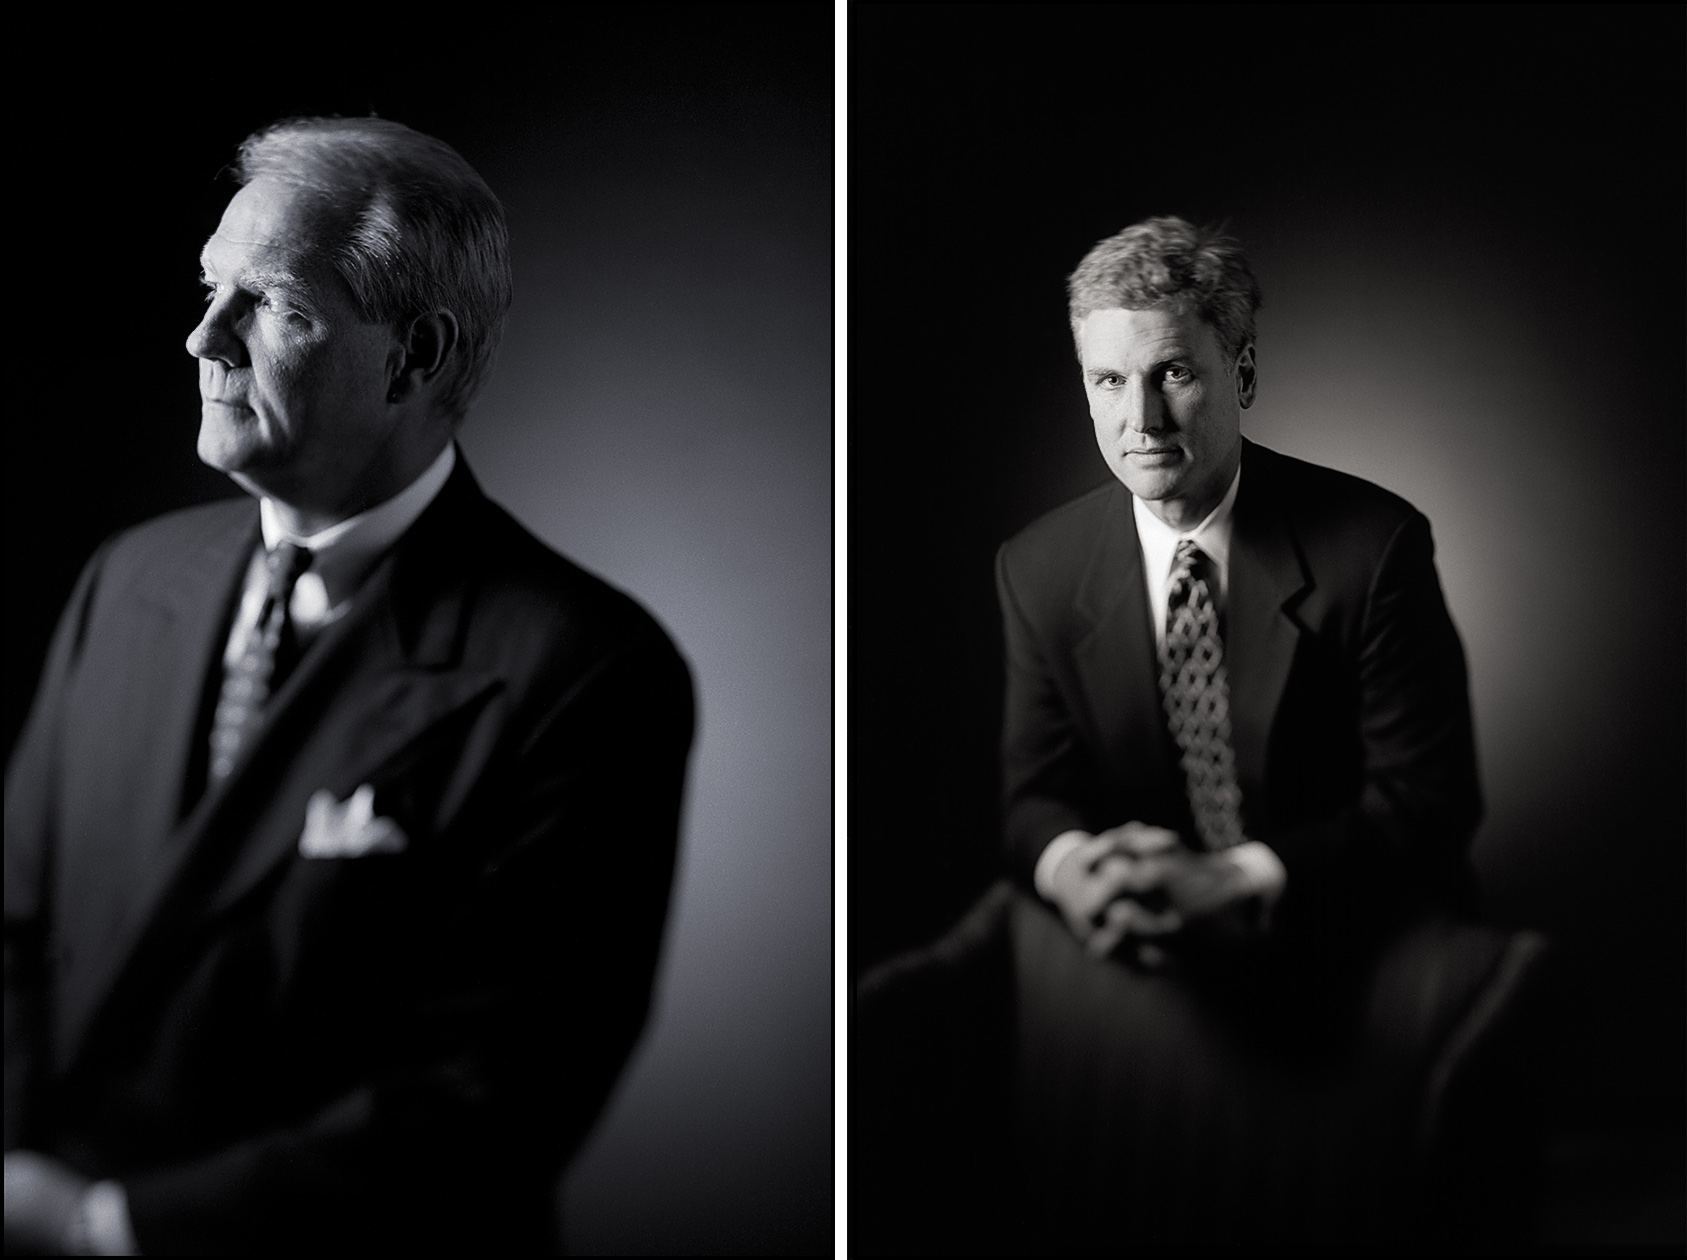 Two panels with executive portraits in black and white with selective focus technique.